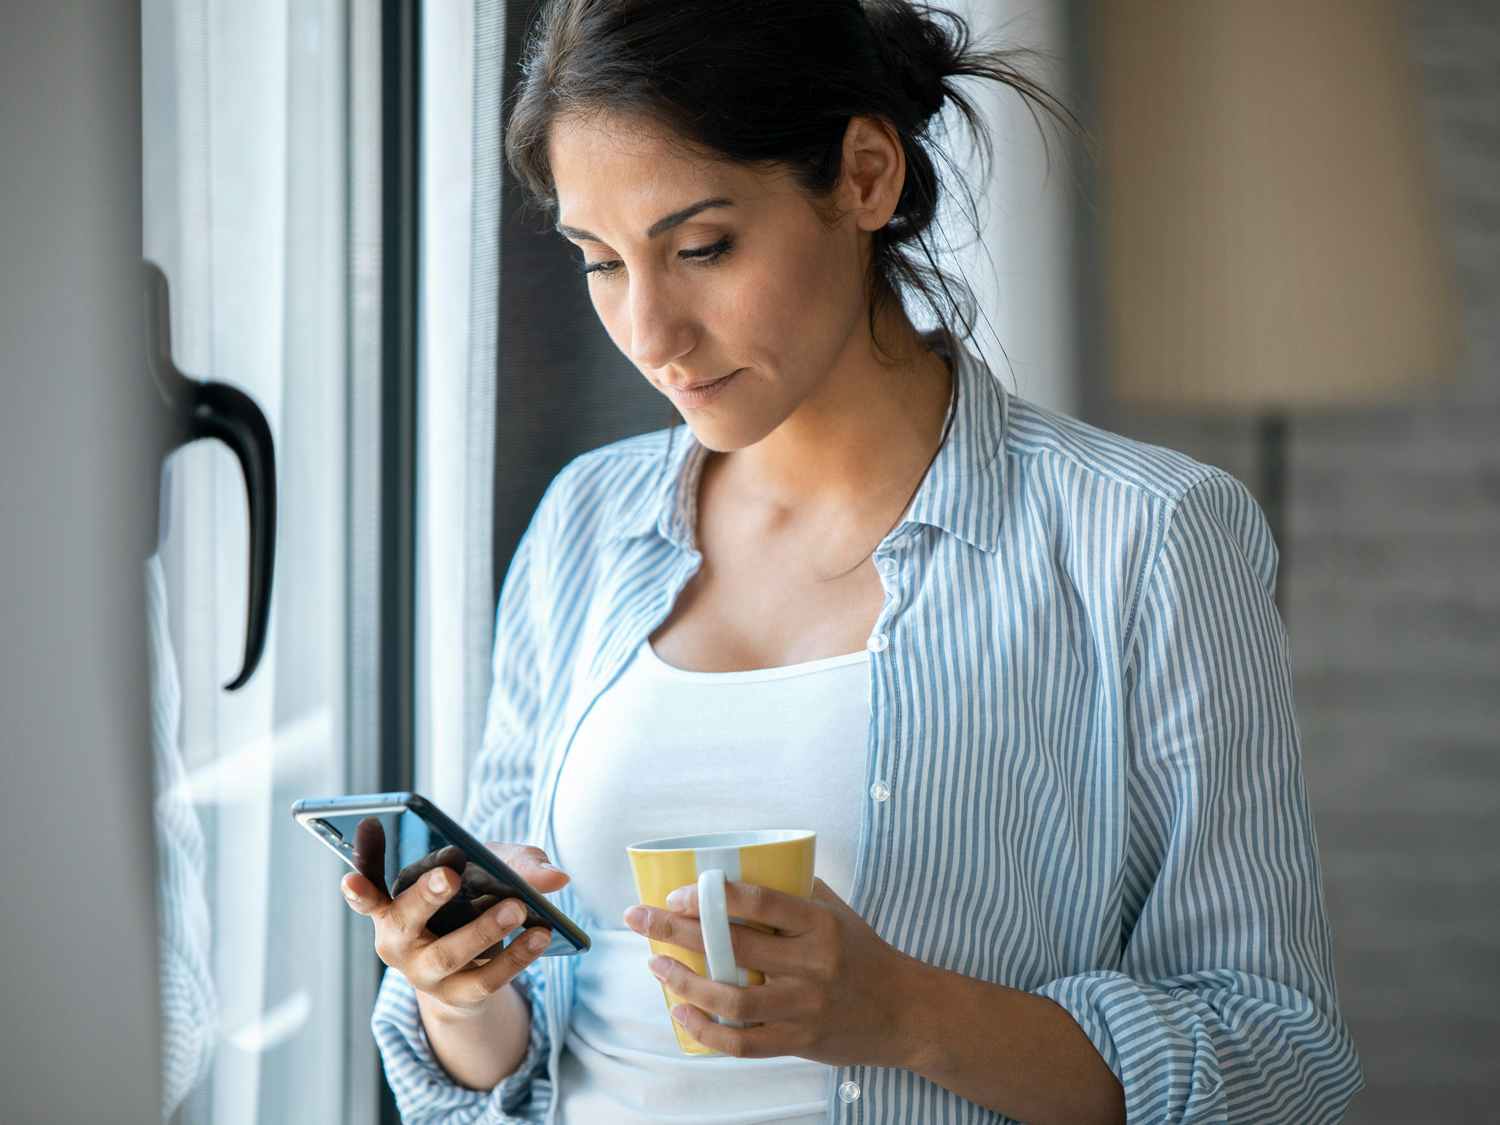 serious person holding coffee mug and looking at phone near window